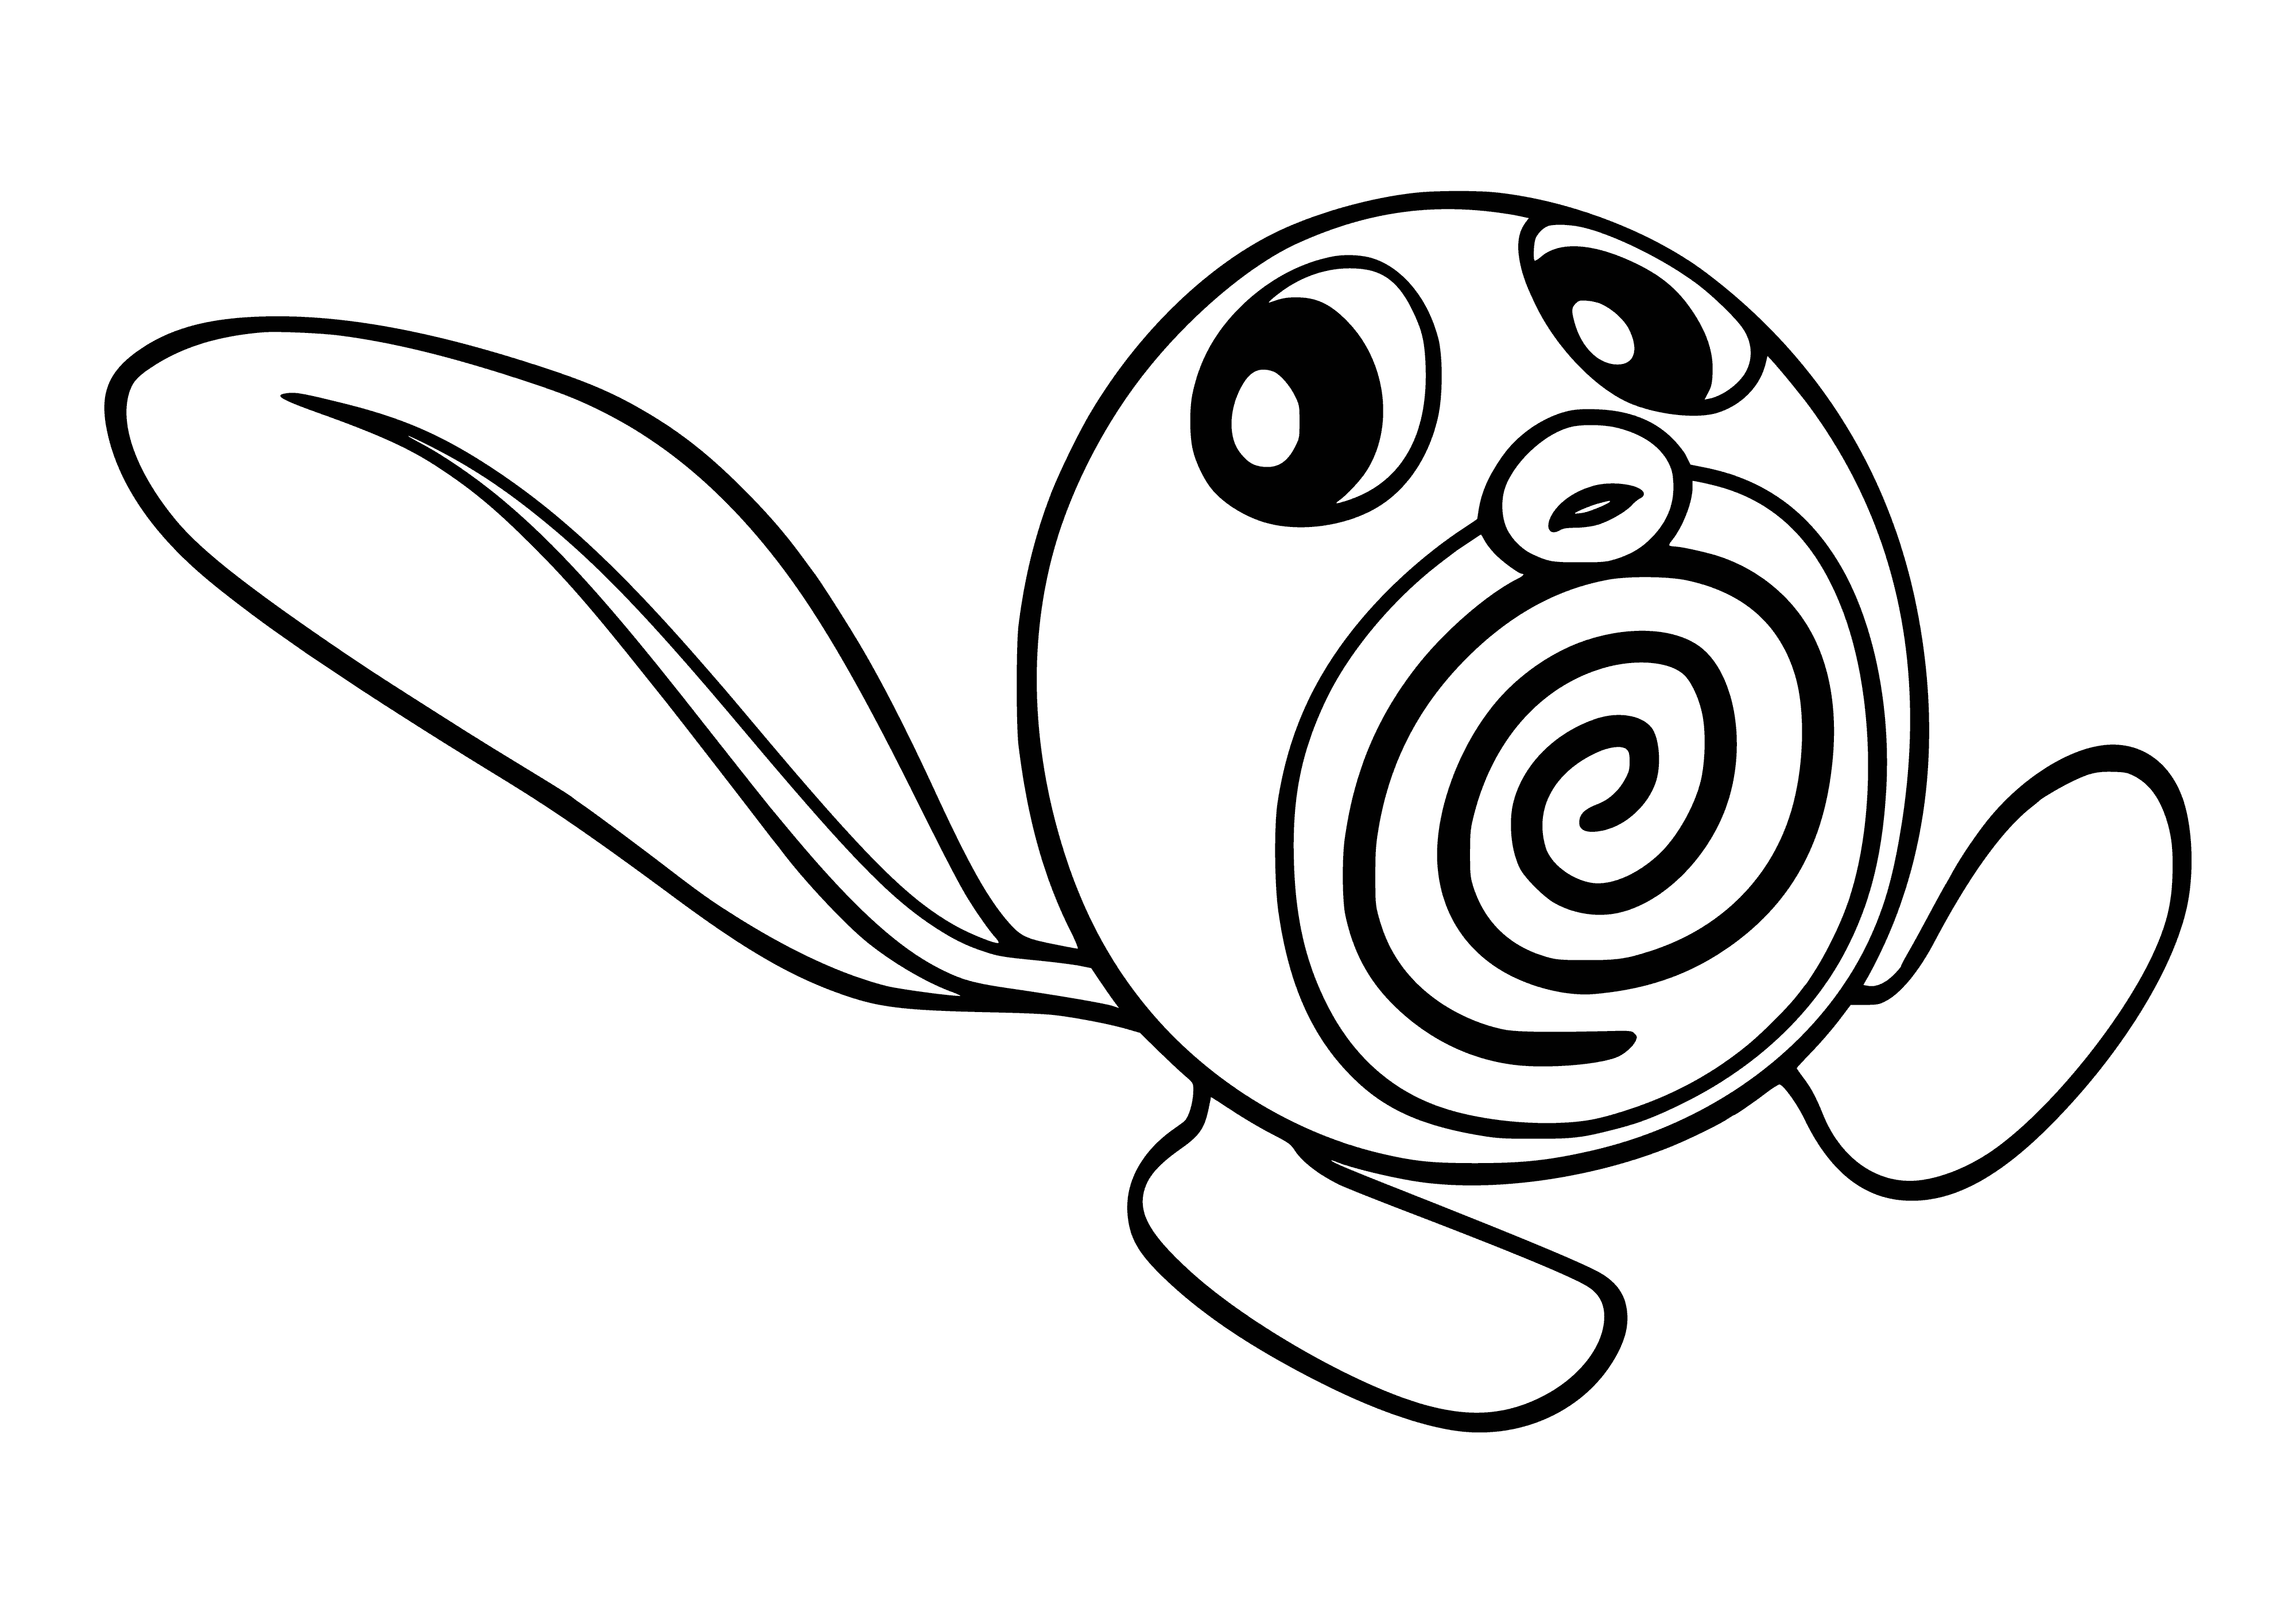 coloring page: Small, blue Pokemon w/ white belly, spiraled black tail, black eyes, red lips, red & white stripes, & black/white spots on head/back.